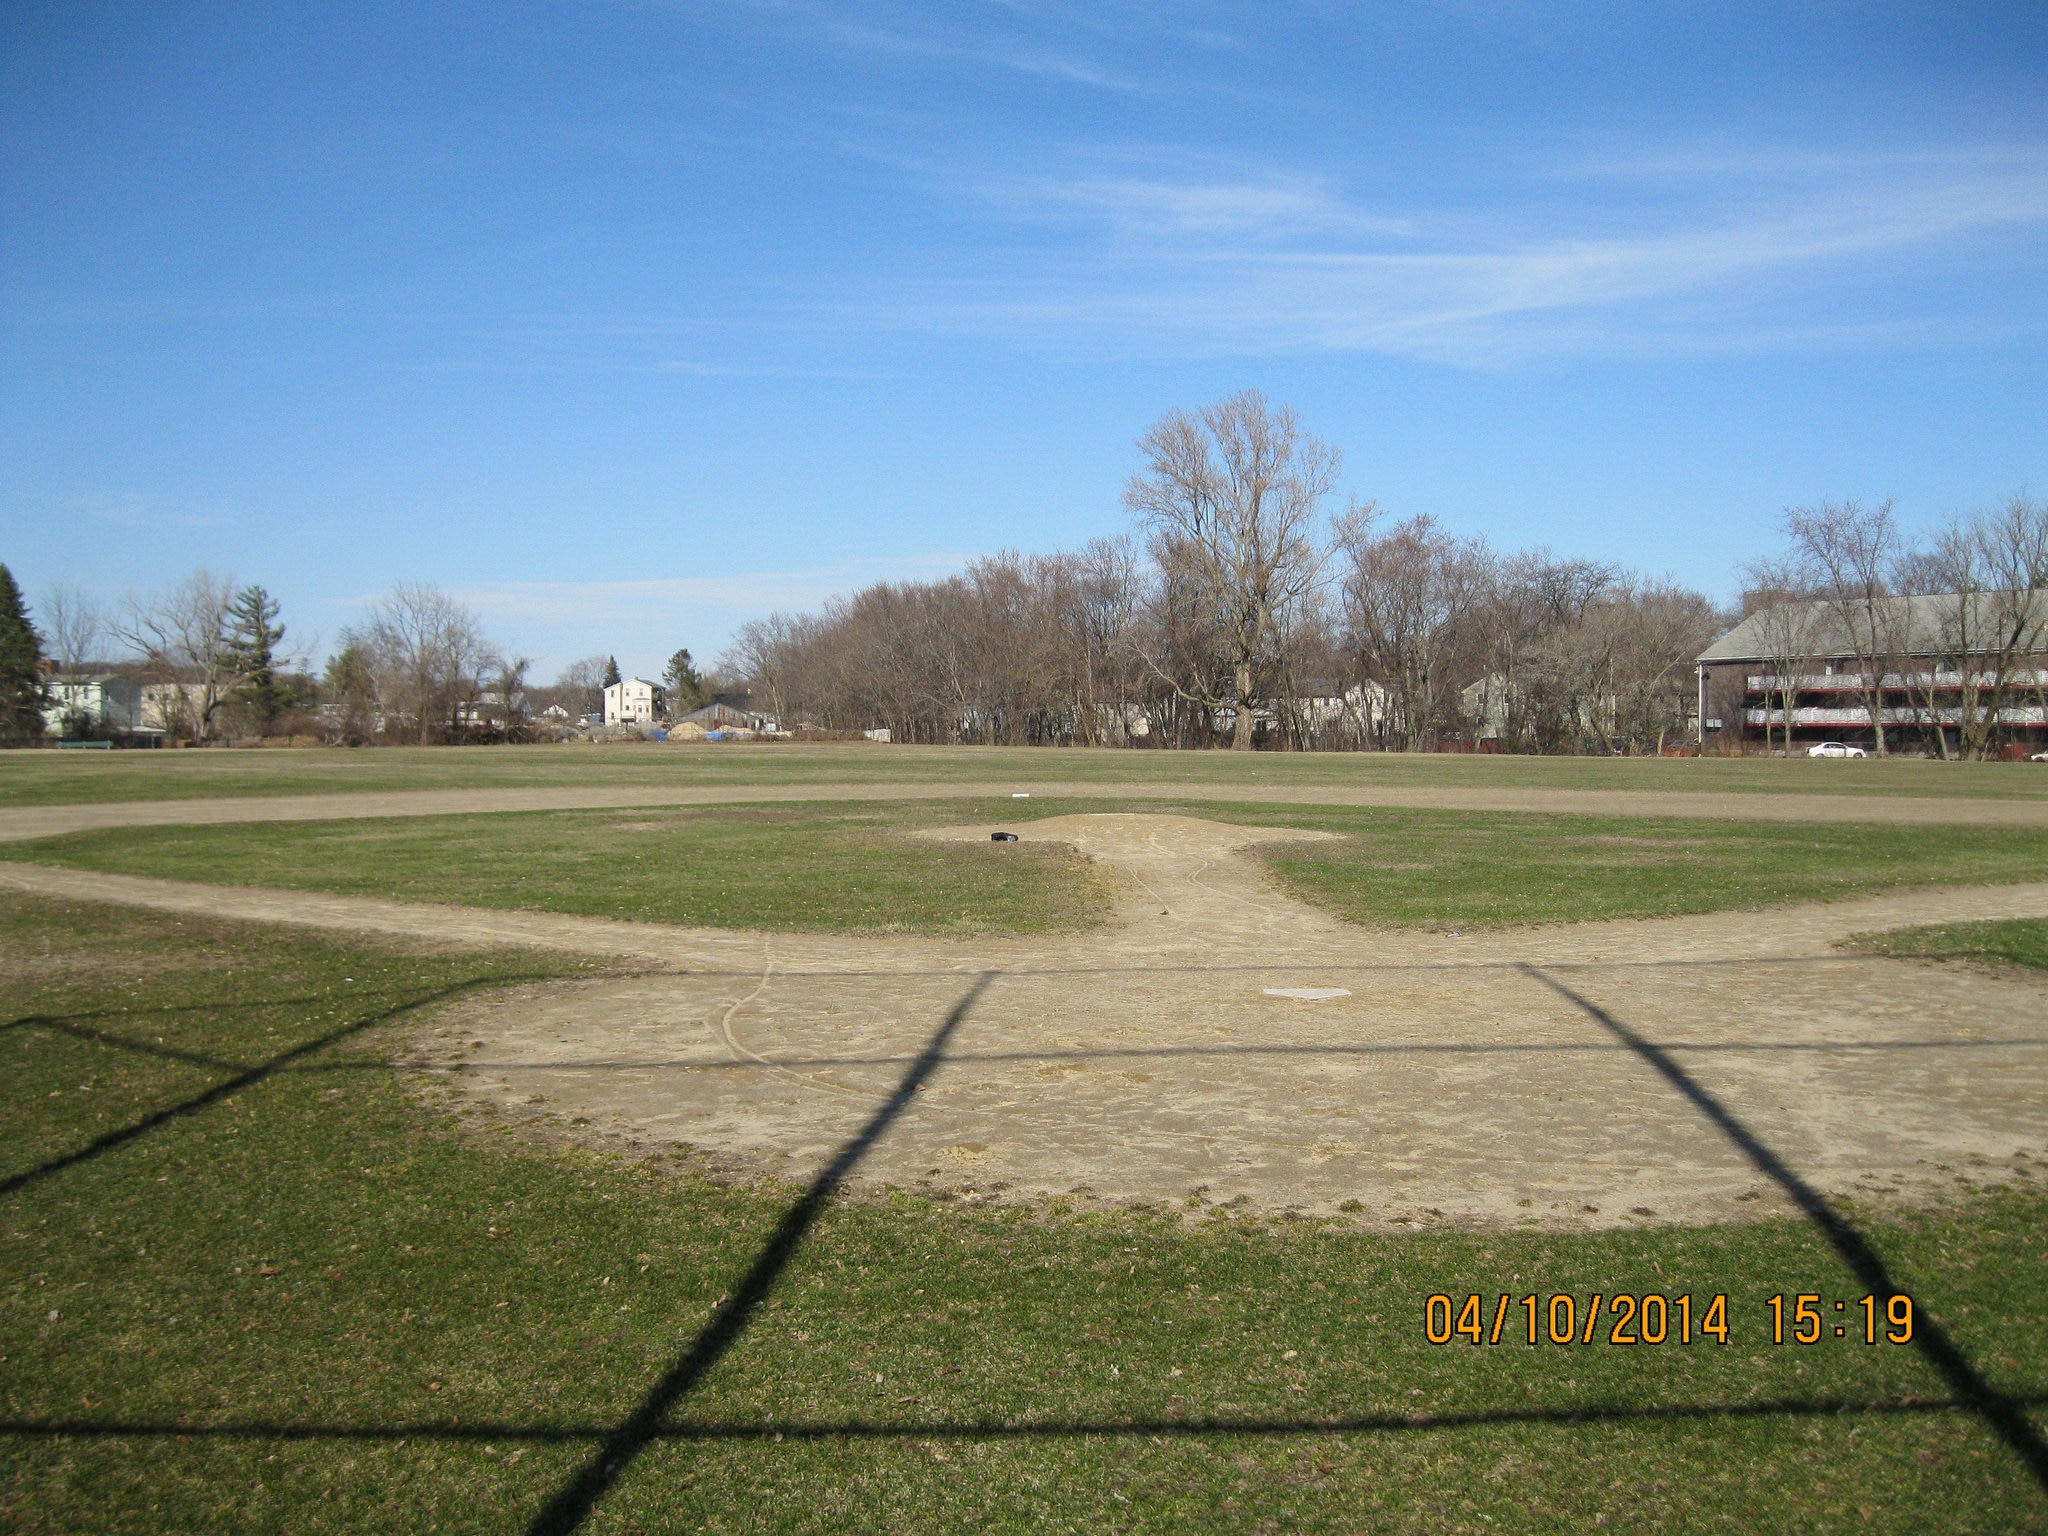 One of three ball fields at Mary Dennison Park, South Framingham, MA